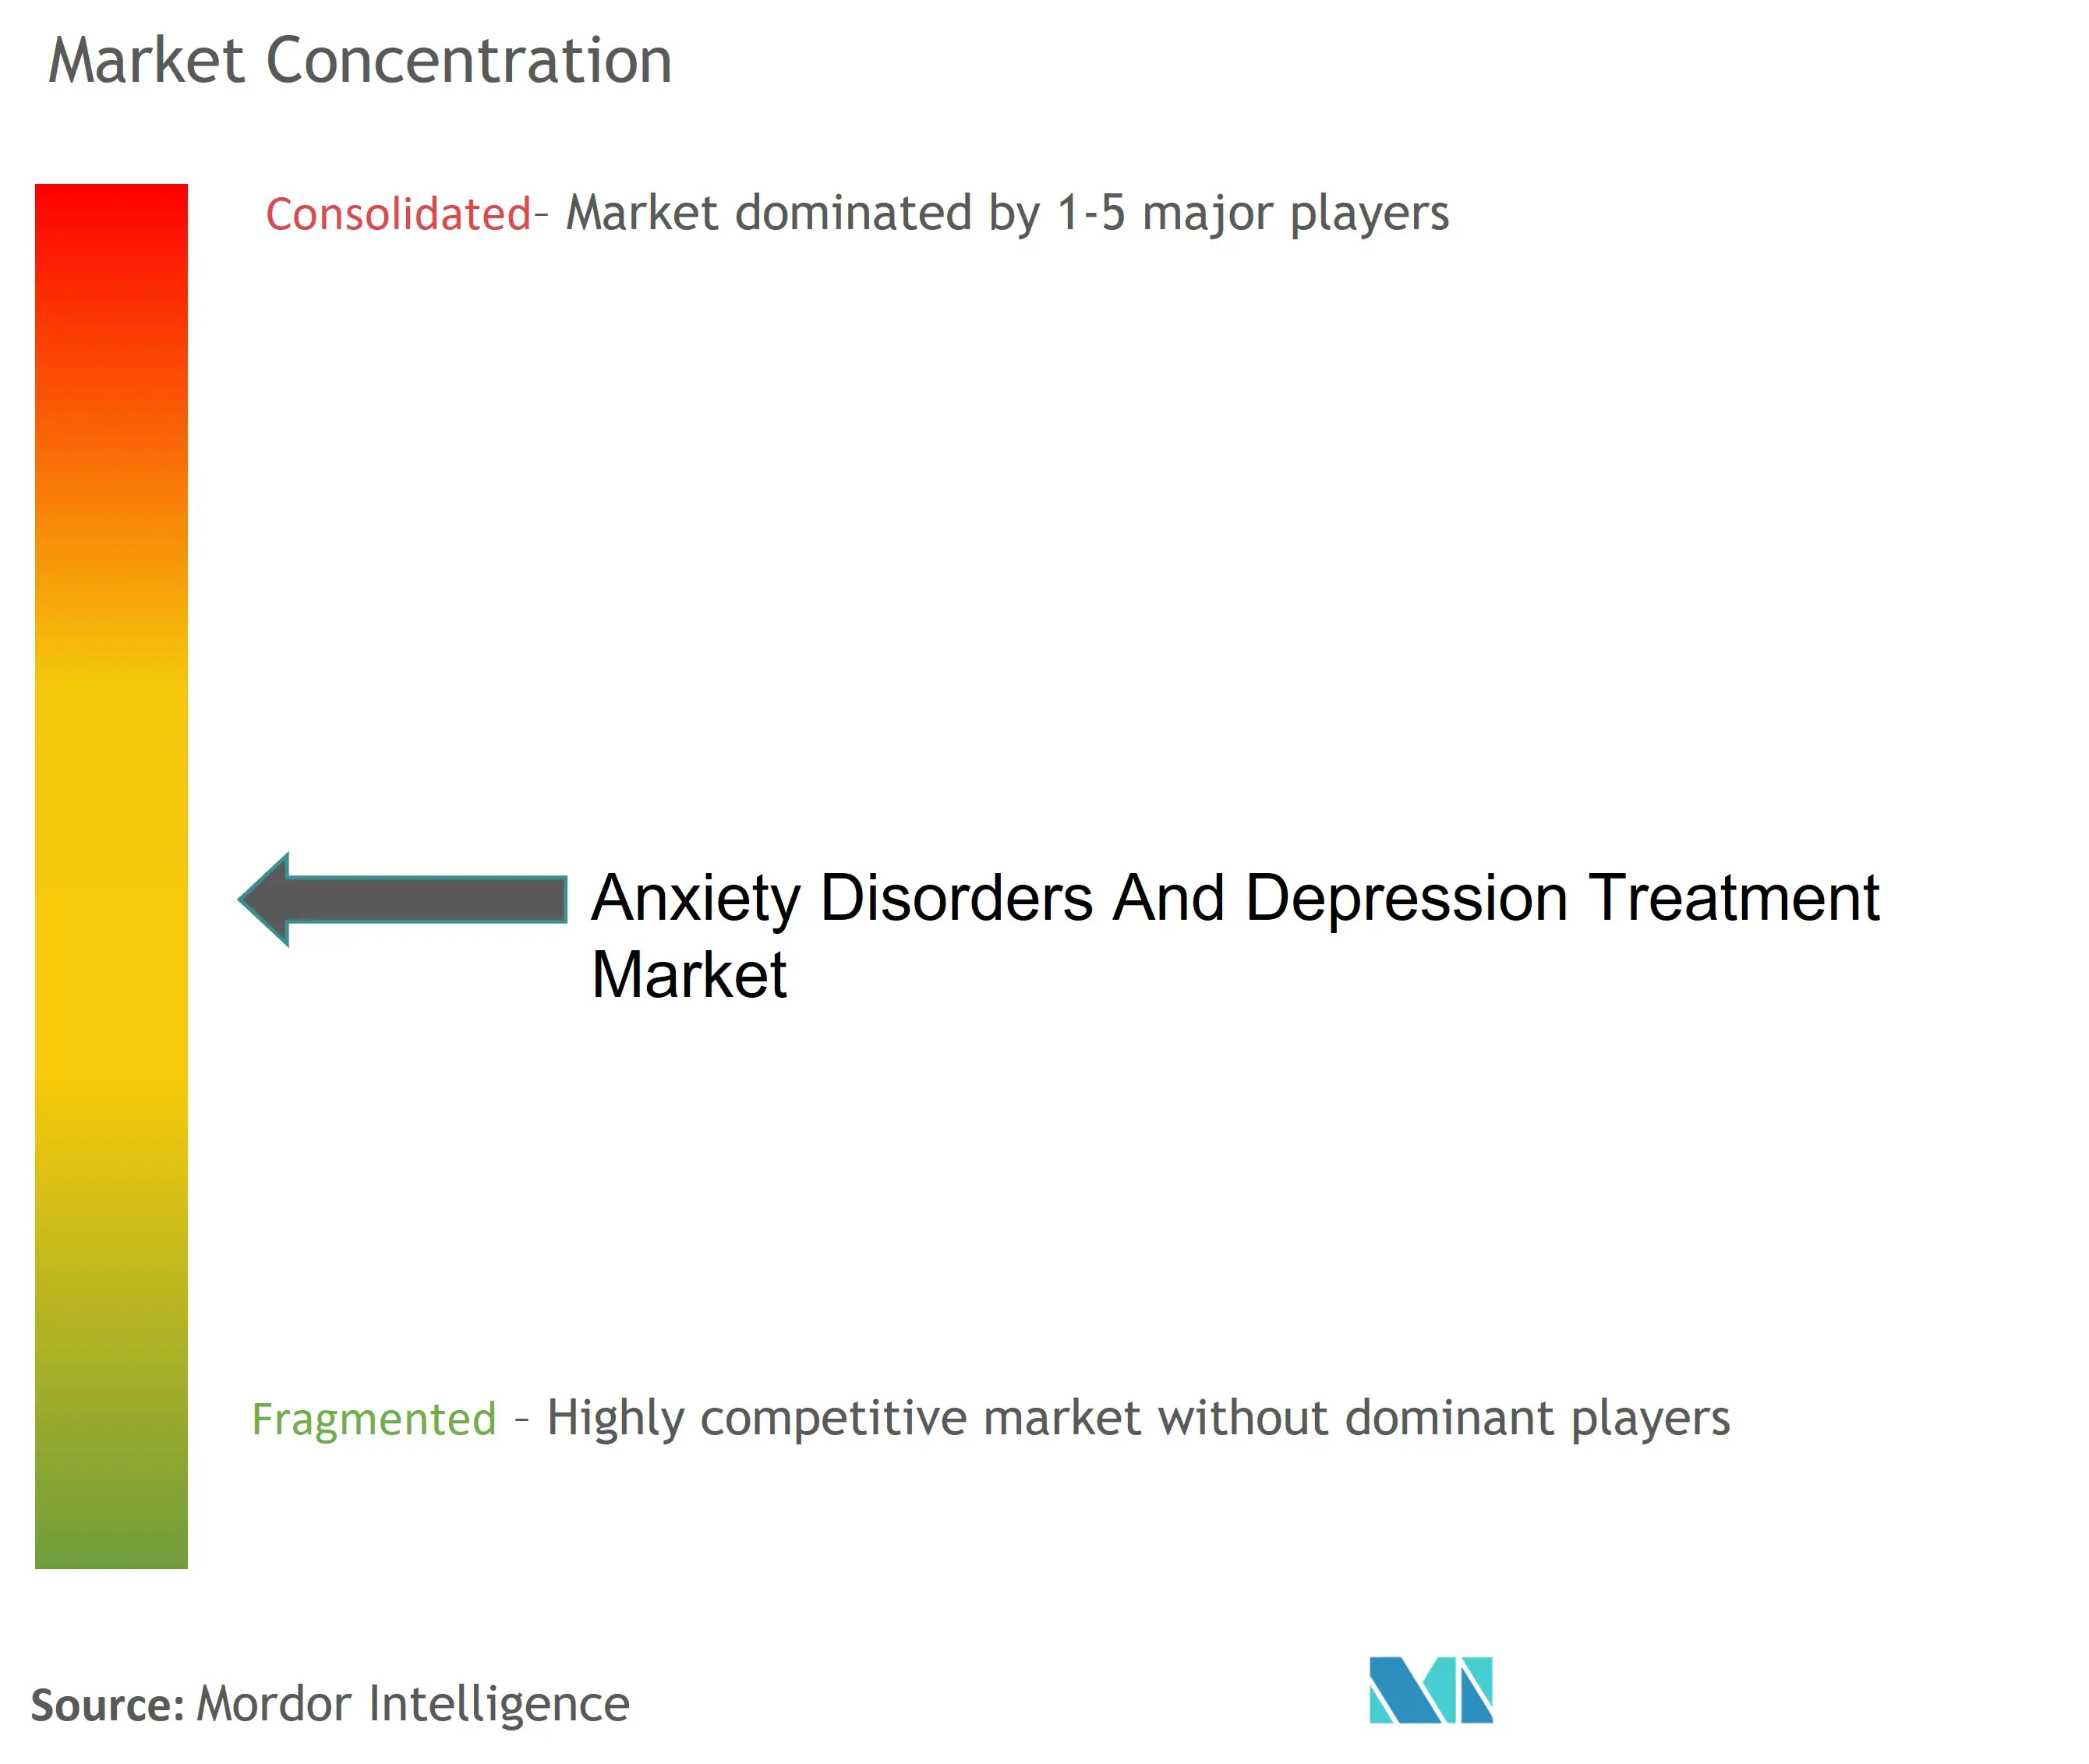 Anxiety Disorders and Depression Treatment Market Concentration